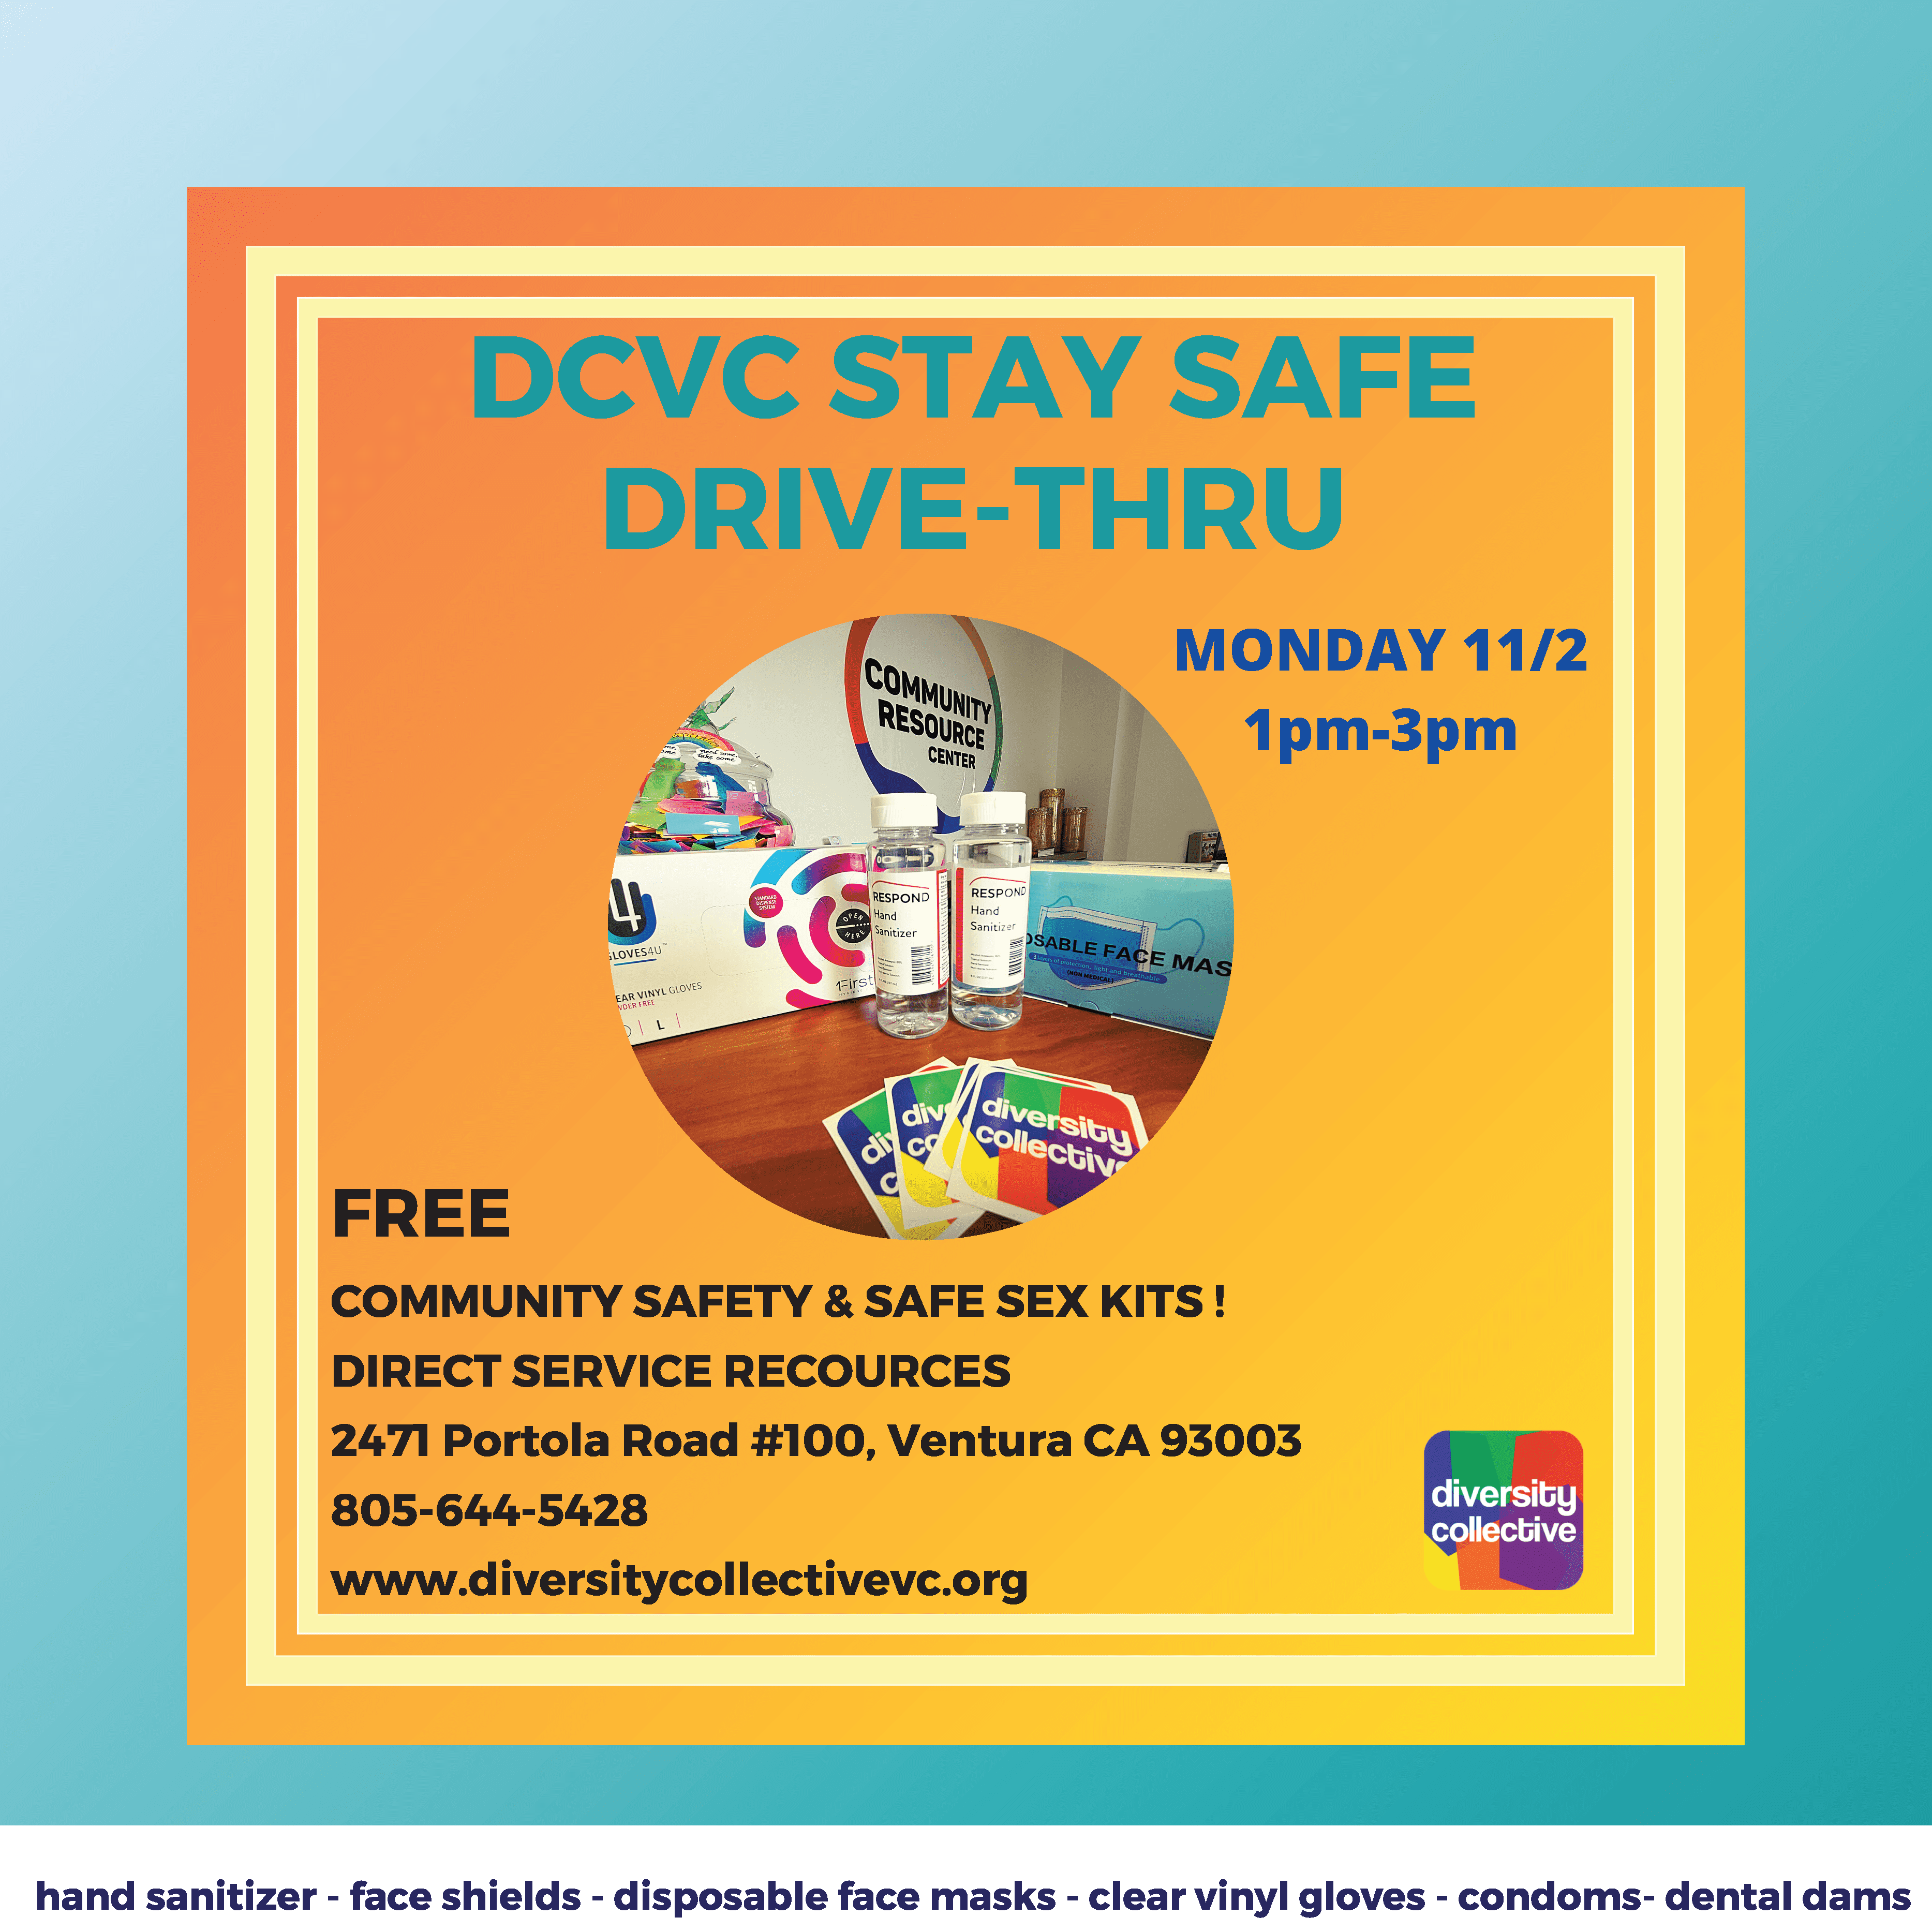 A flyer advertising the diversity collective ventura county's "dcvc stay safe drive-thru" event offering free community safety and safe sex kits, including hand sanitizer, face shields, masks, gloves, and more.